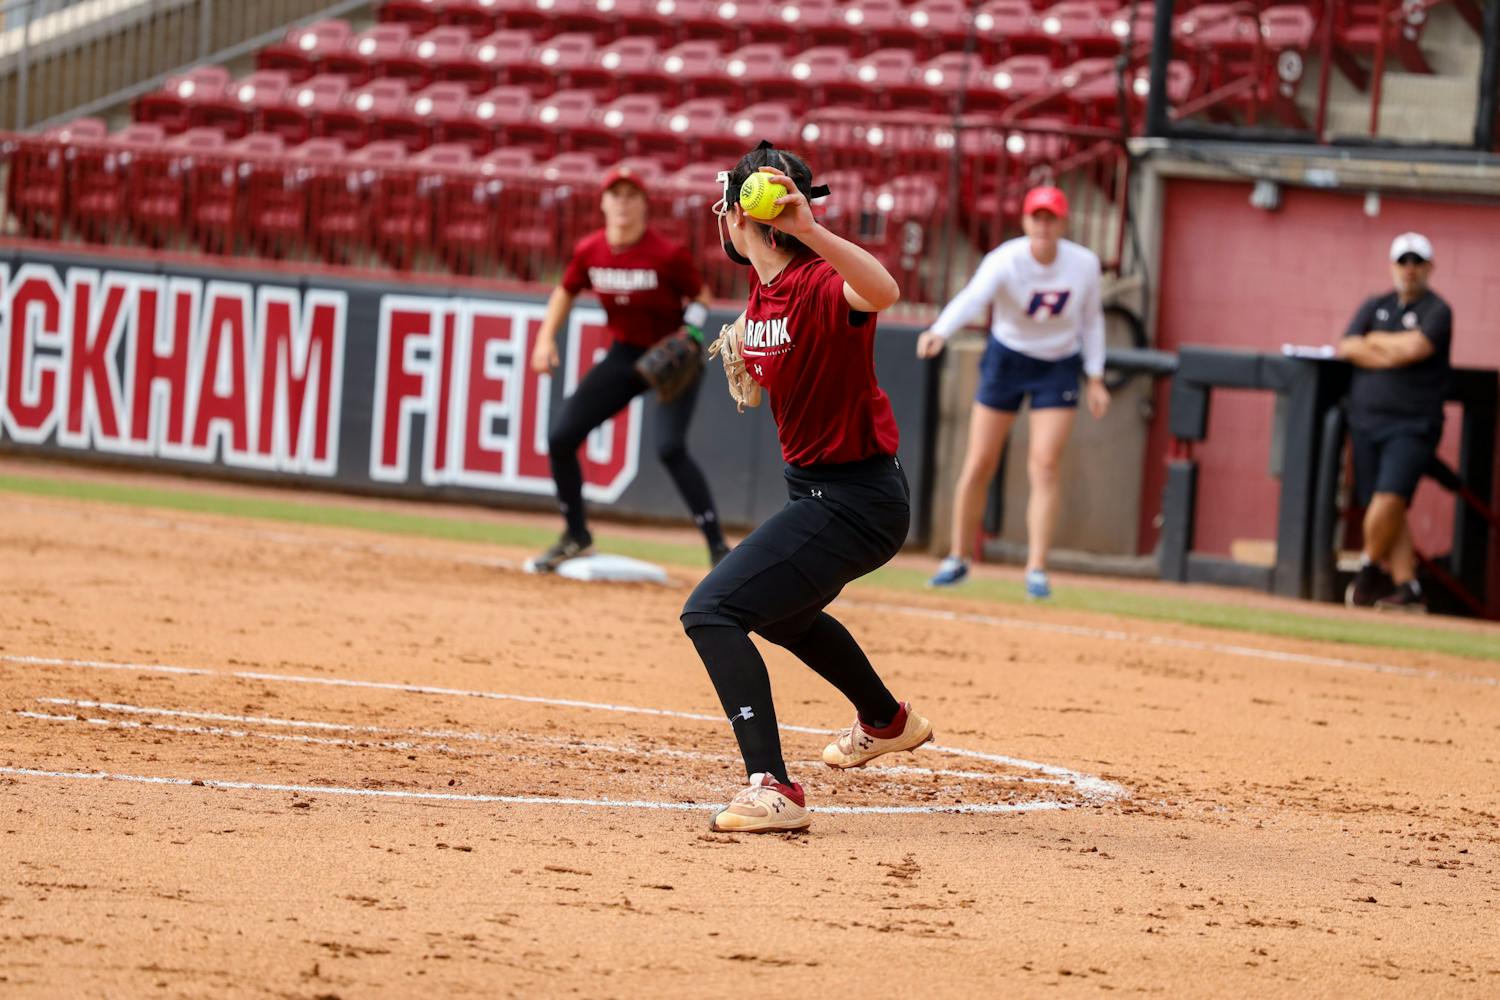 Junior utility/pitcher Skylar Trahan throws the ball to first base for an out during the exhibition game against 鶹С򽴫ý Aiken at Beckham Field on Oct. 9, 2022. The Gamecocks defeated the Pacers 7-0.